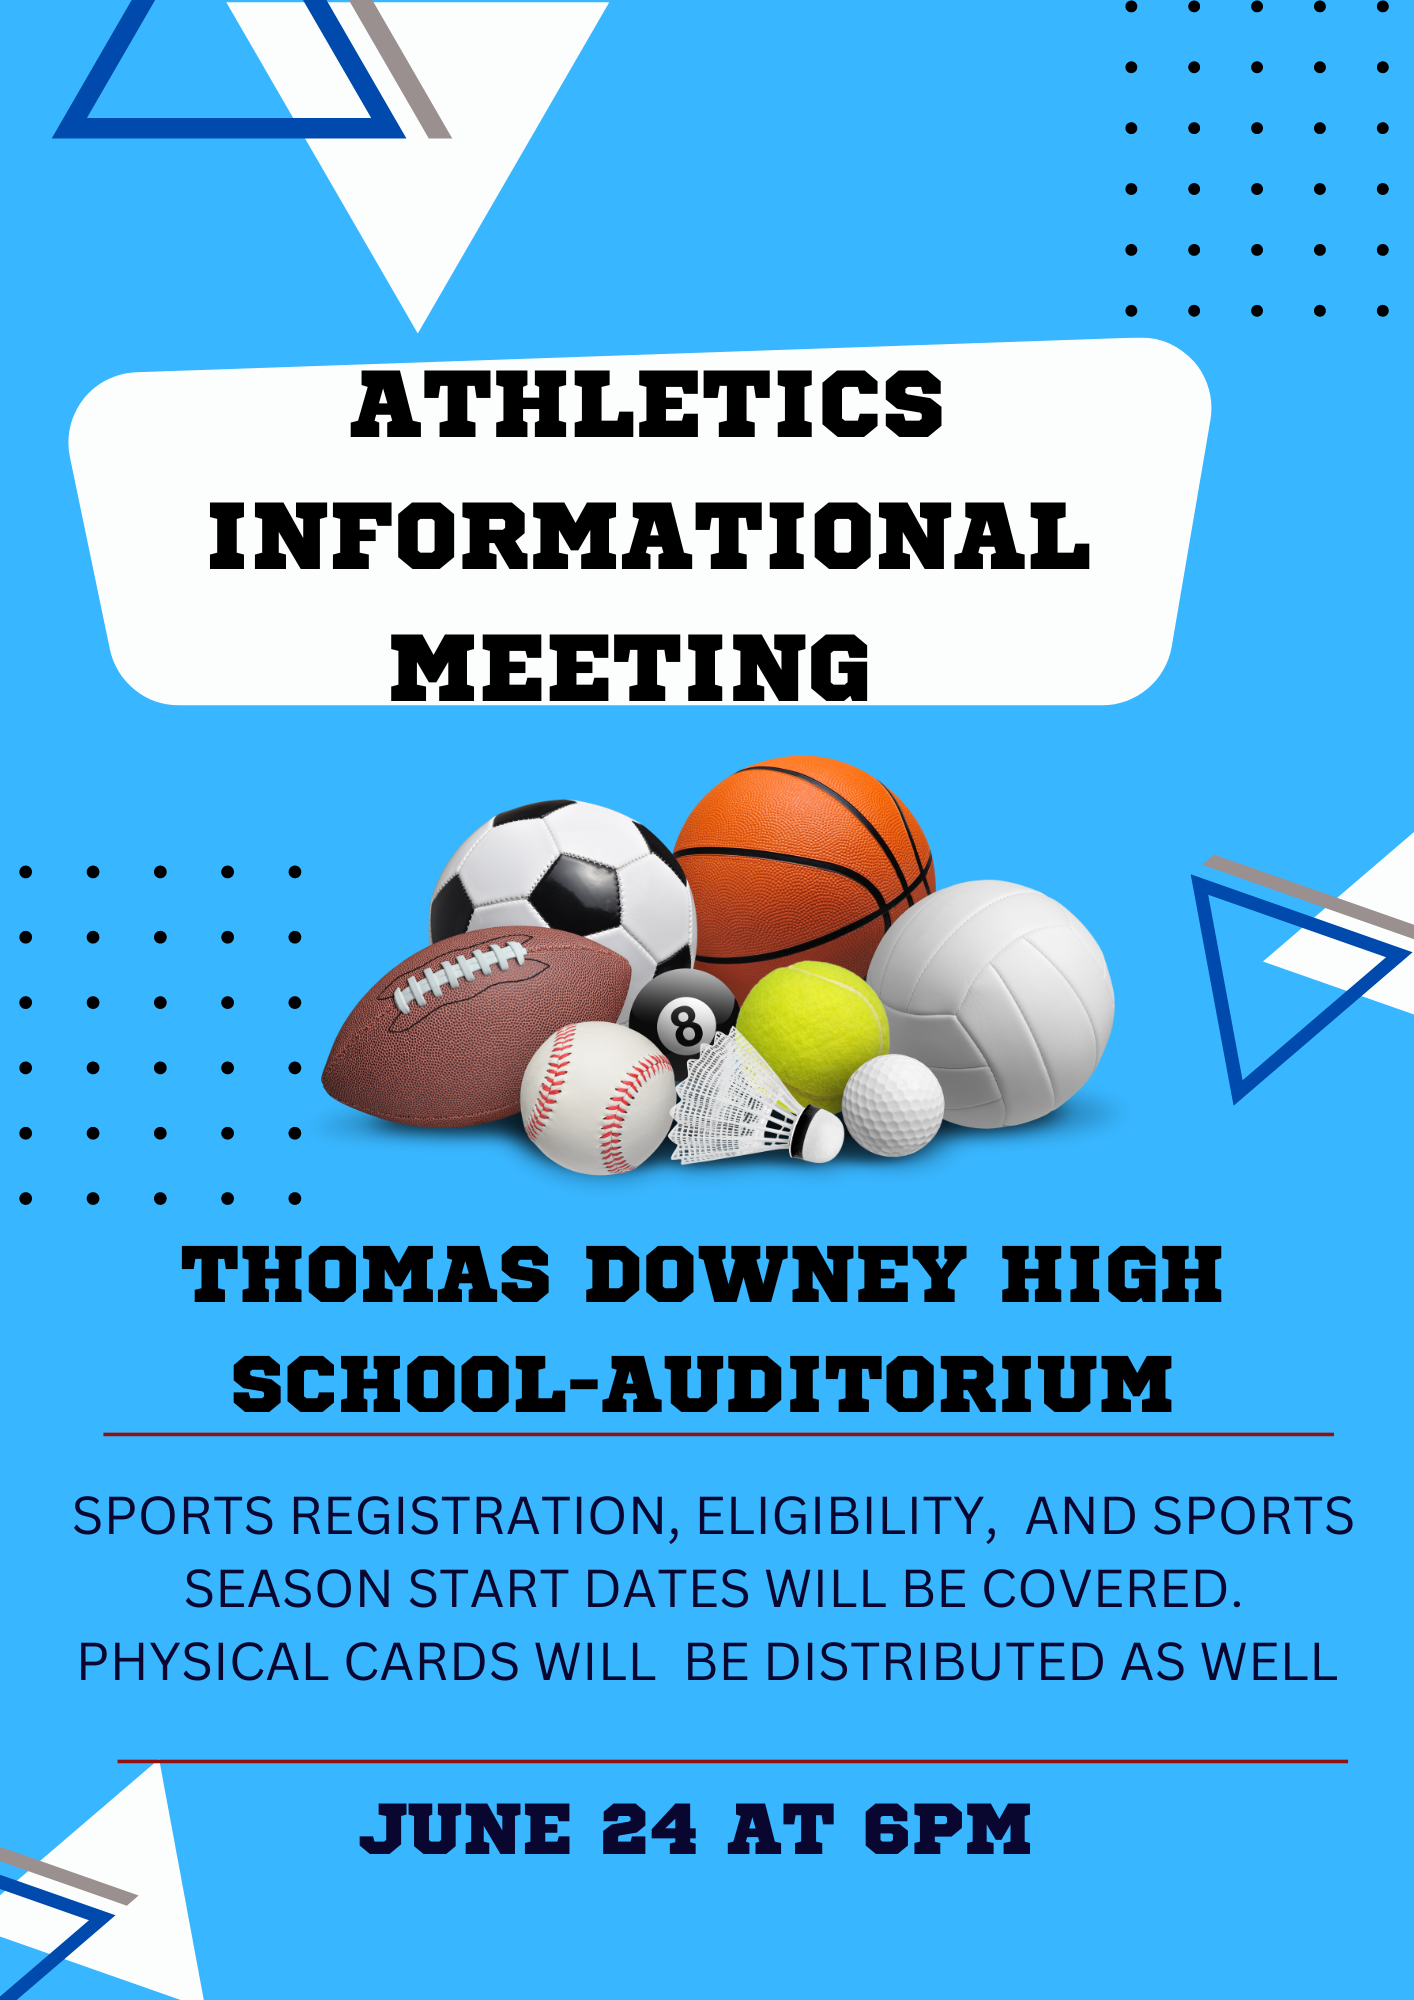 ATHELTIC DIRECTOR INFO MEETING FLYER